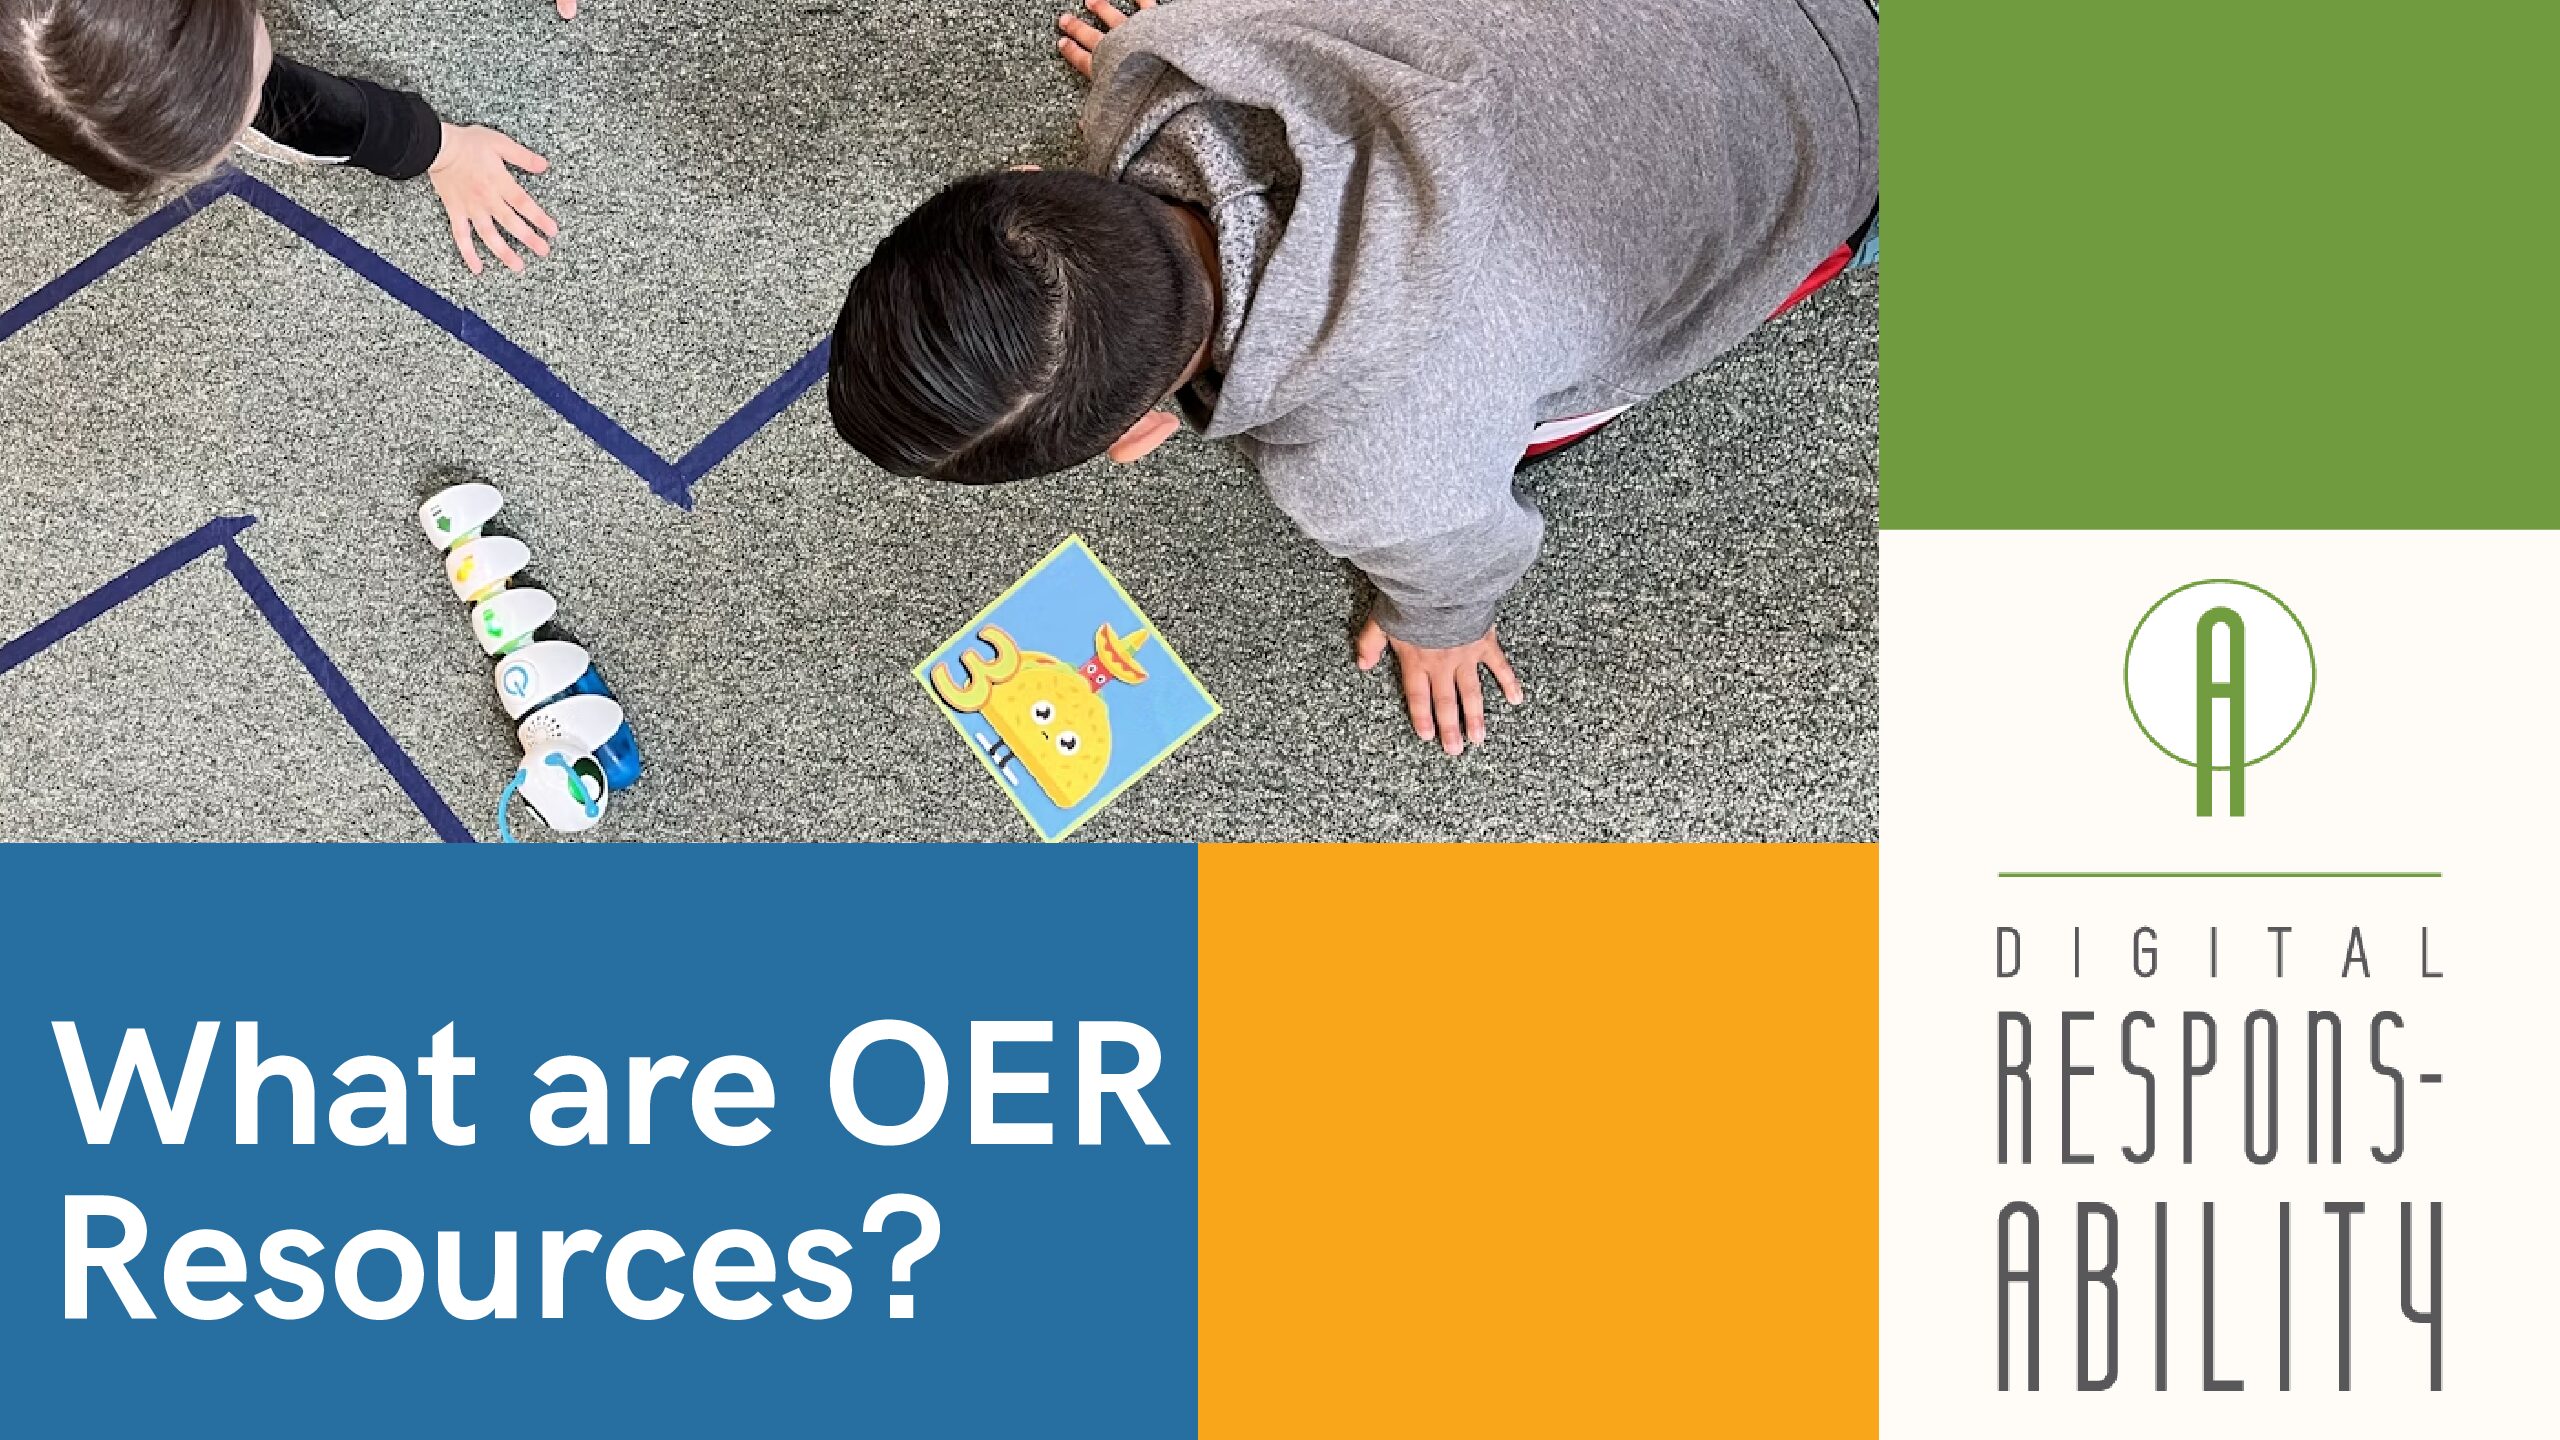 What are OER Resources?